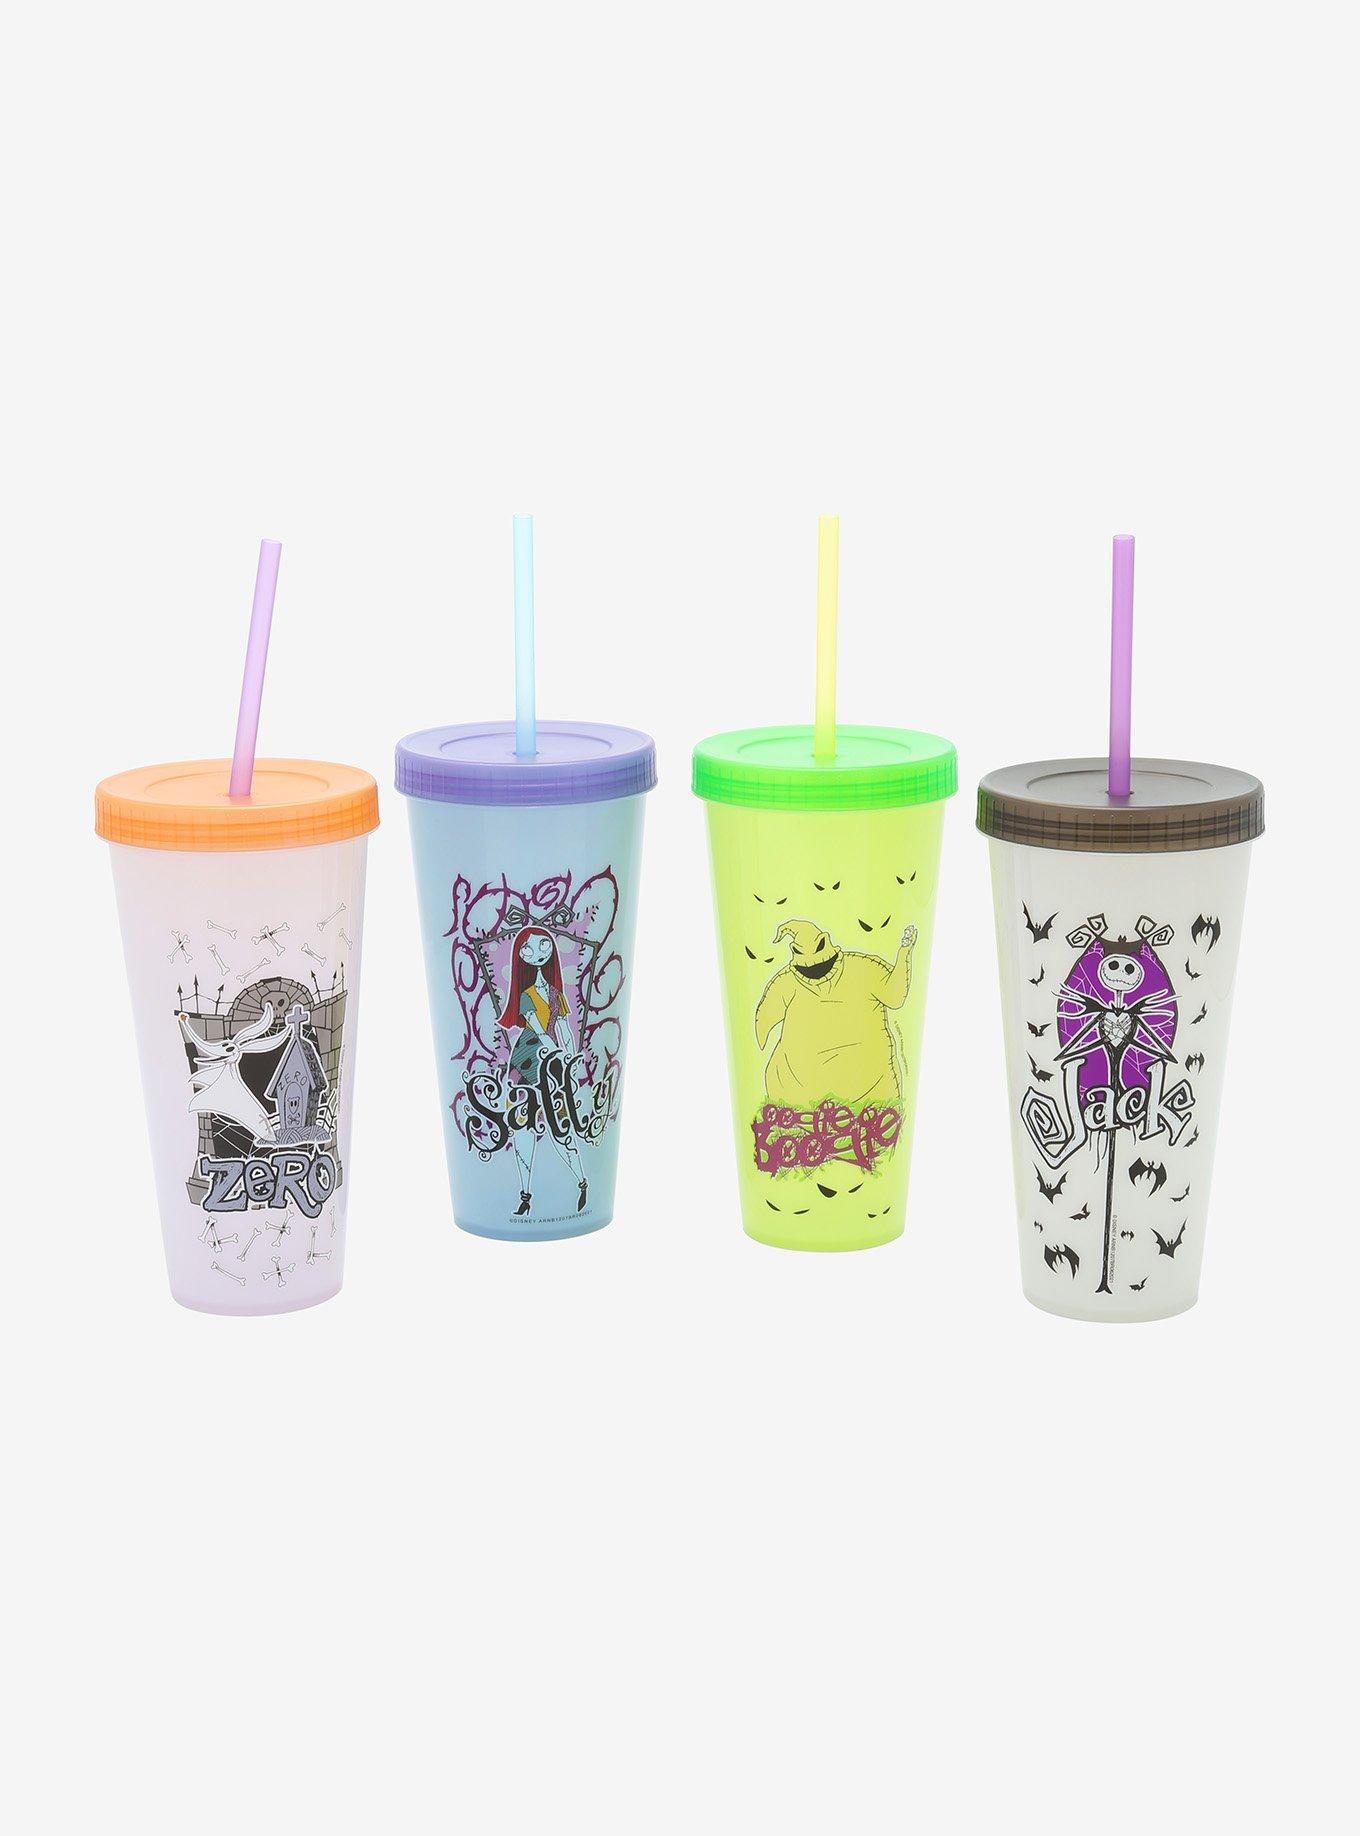 Color Changing Disney Tumblers Give Drinks a Magical Flair